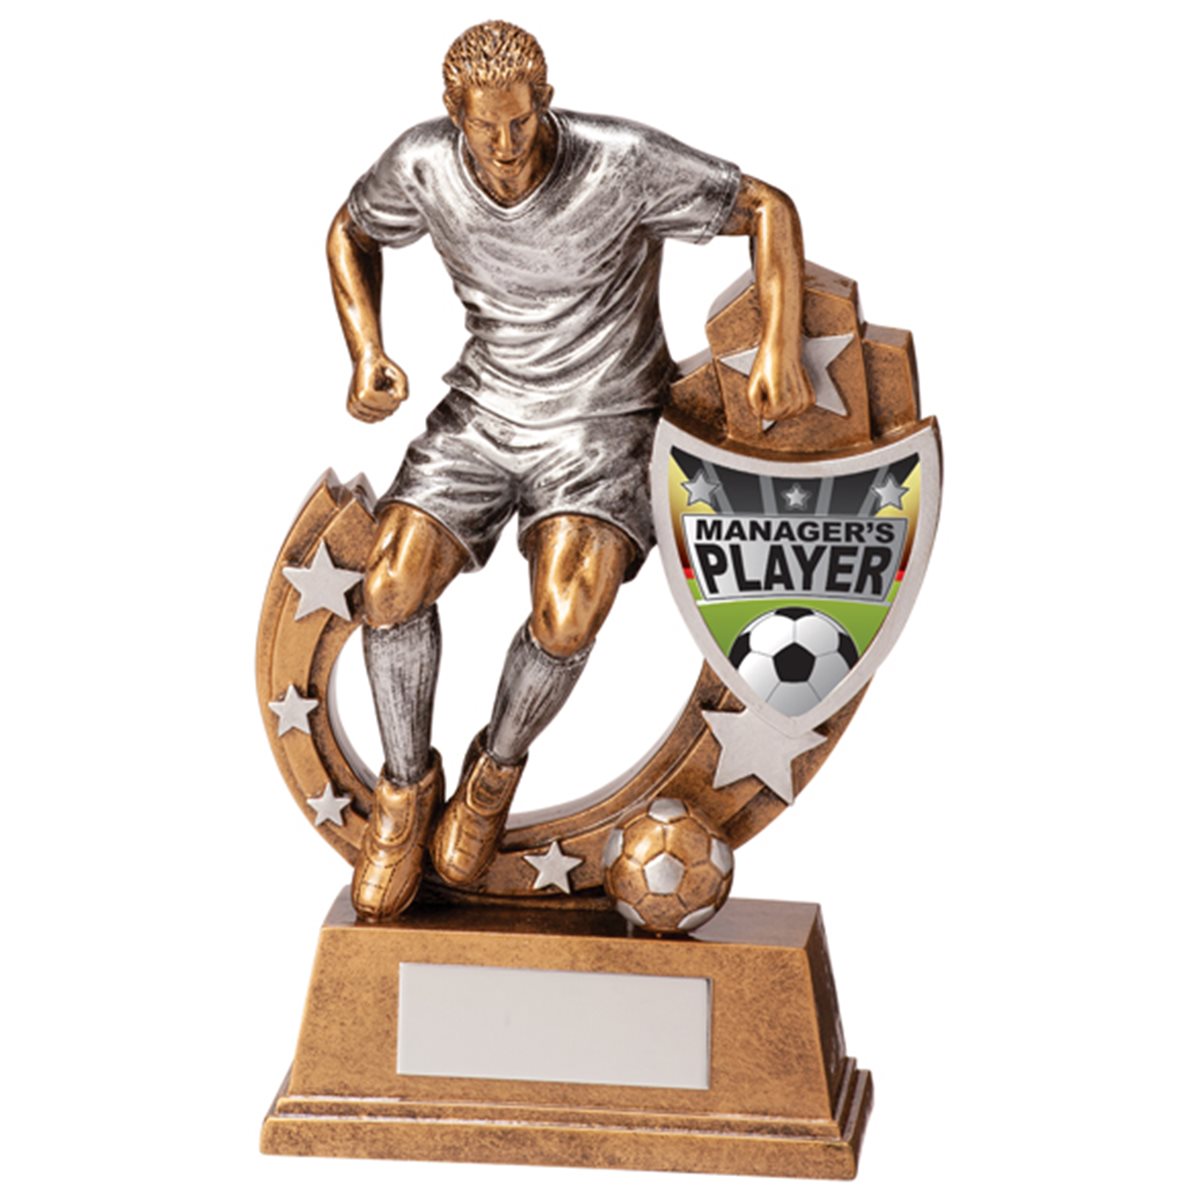 Galaxy Male Manager's Player Football Trophy RF20643